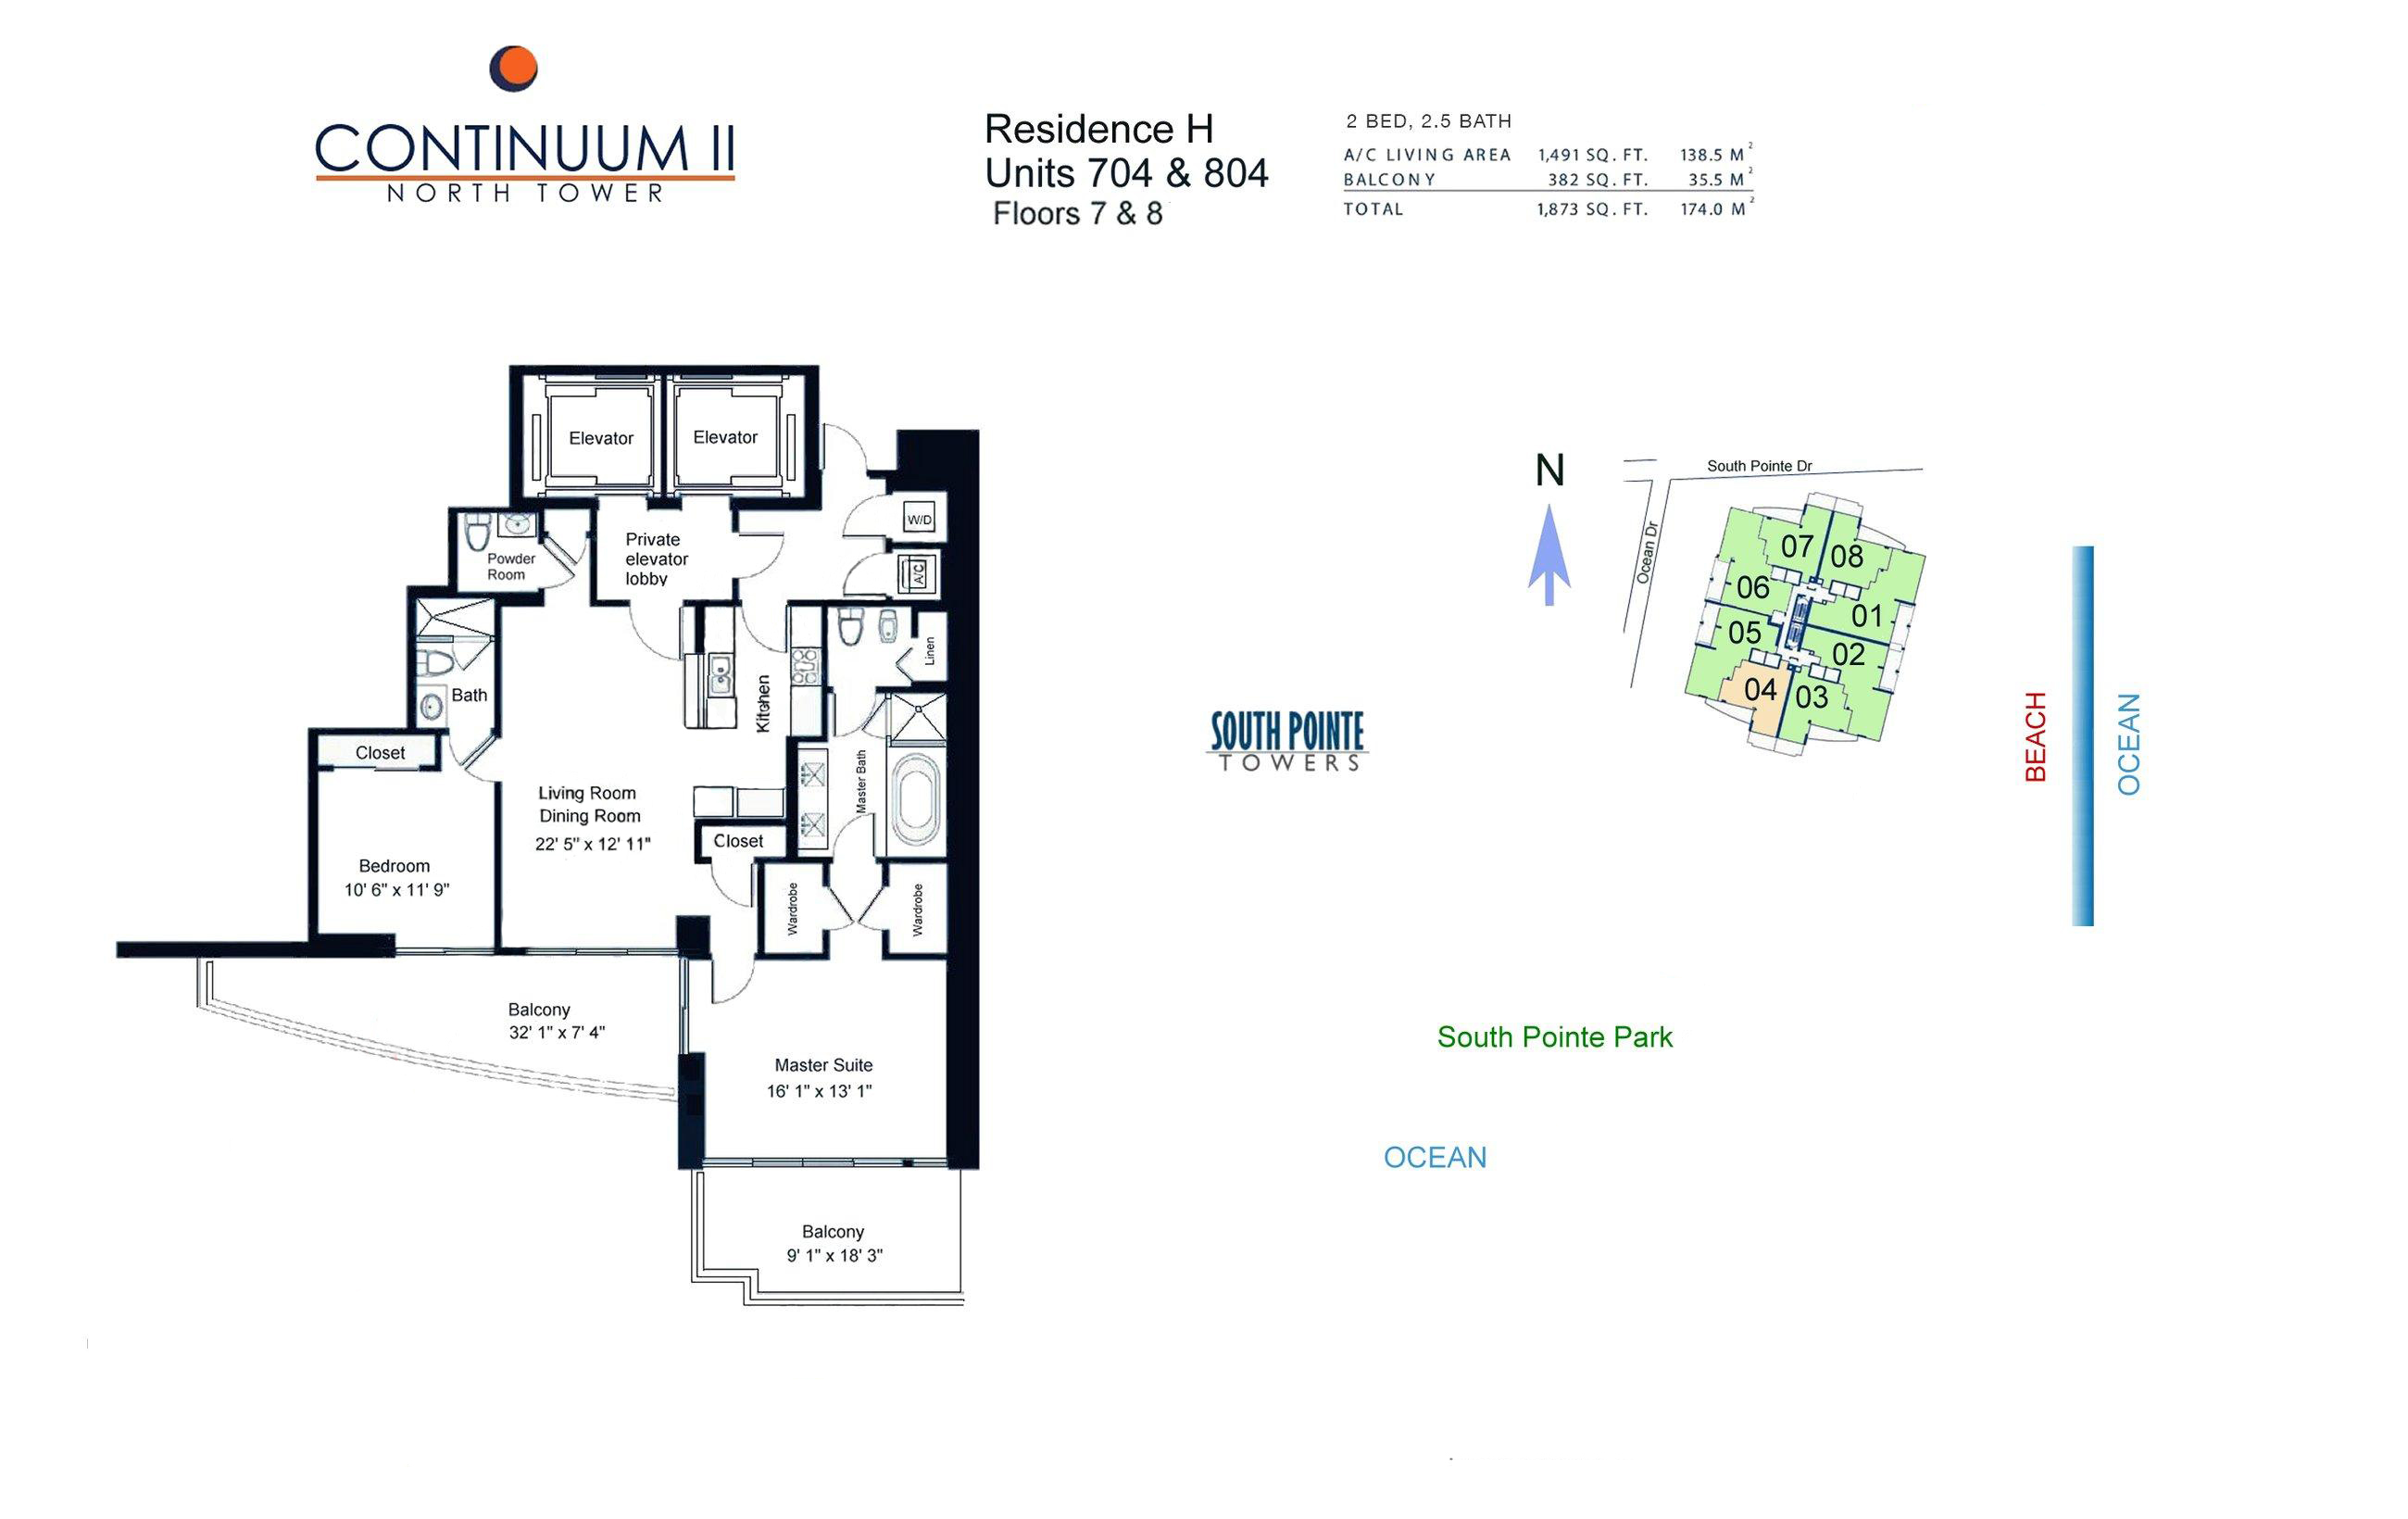 Continuum North Tower Residence H